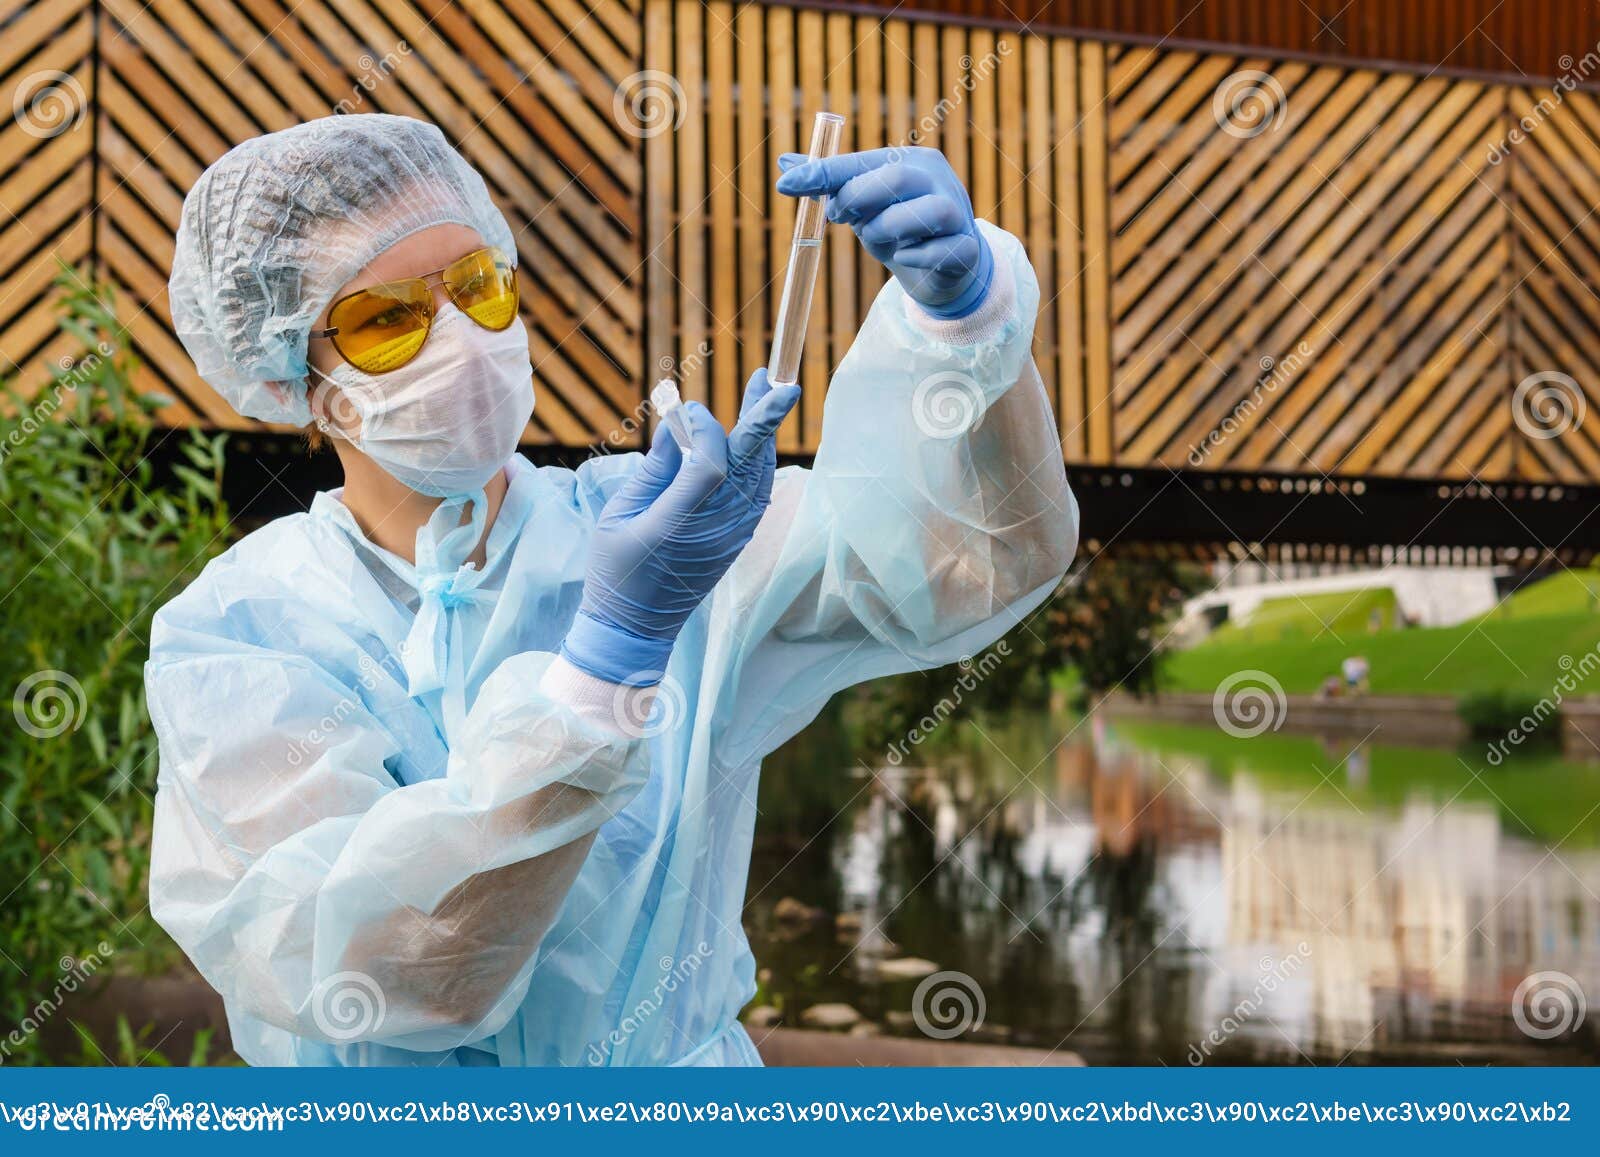 female ecologist or epidemiologist checks water quality in urban pond